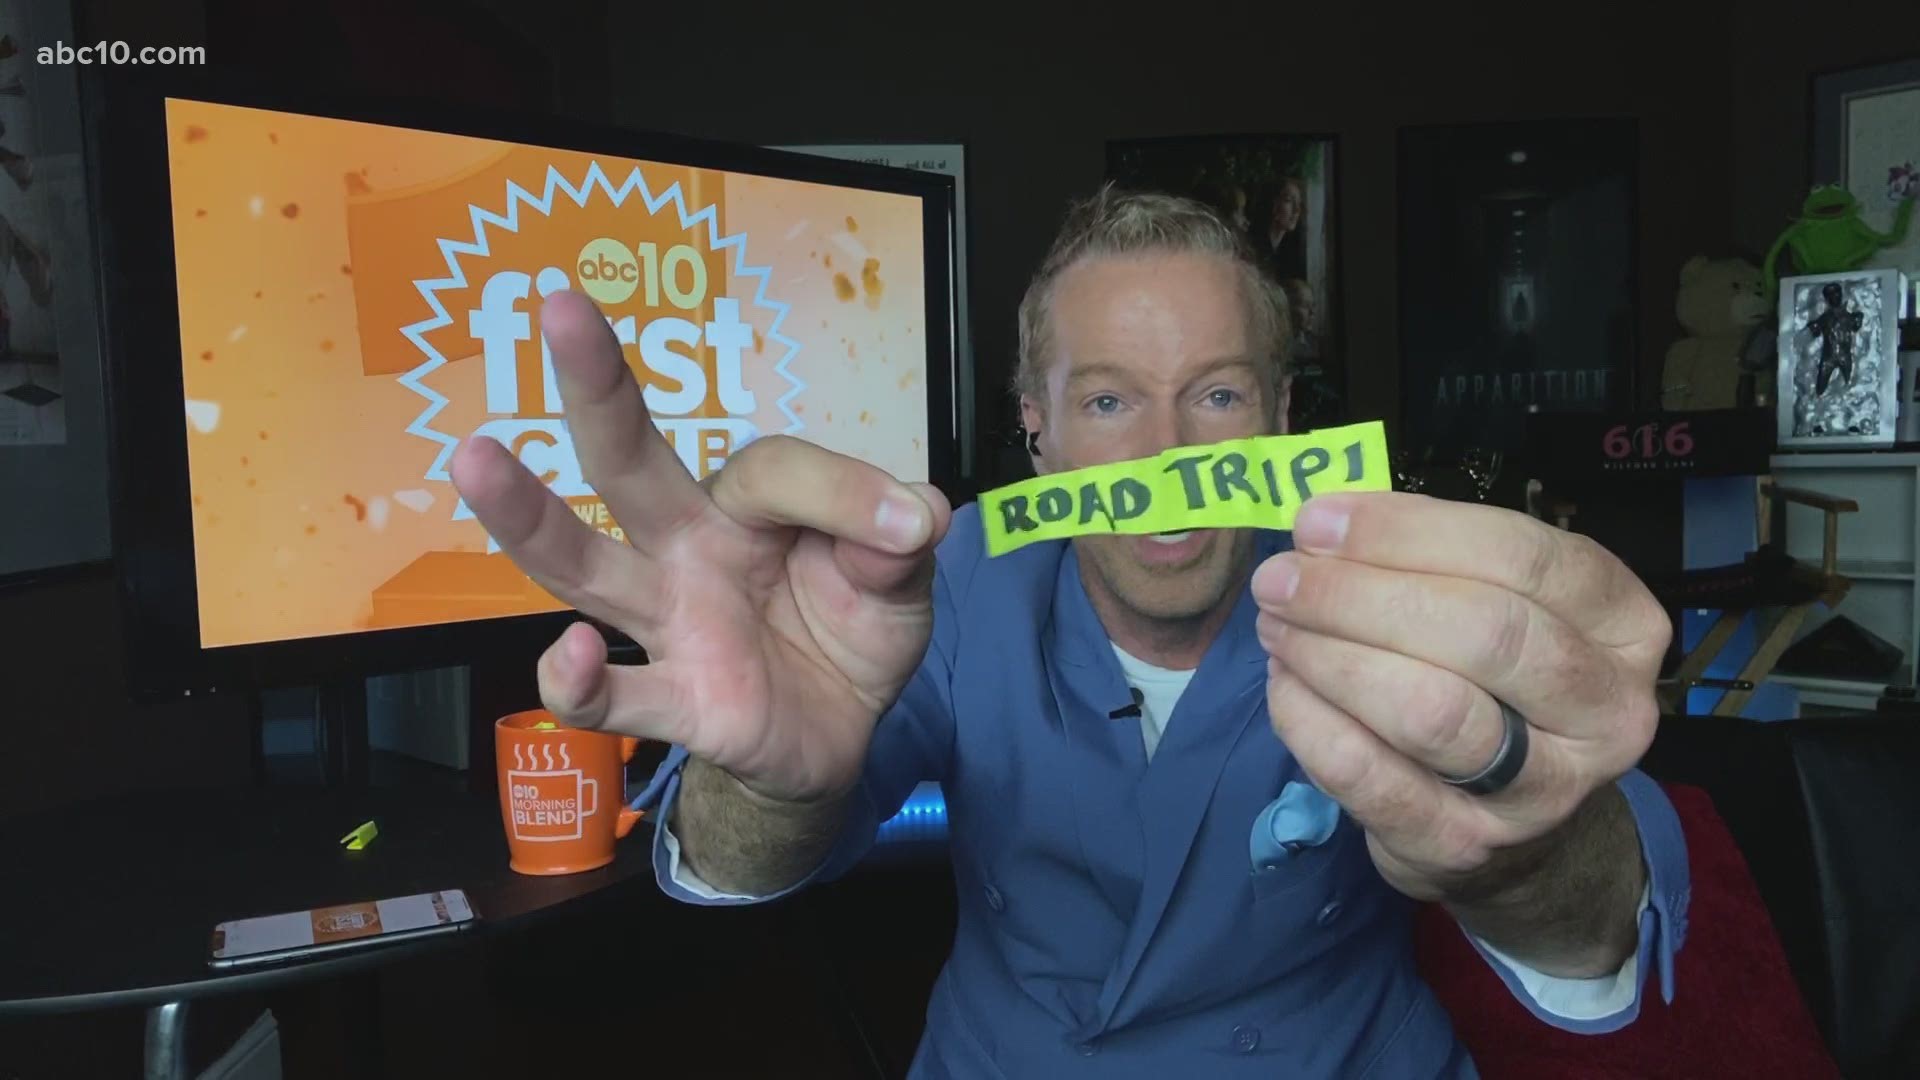 We want you to join the ABC10 First Club. All you need to do is share your photos or videos of your first road trip. Upload your pictures or videos on the ABC10 app.